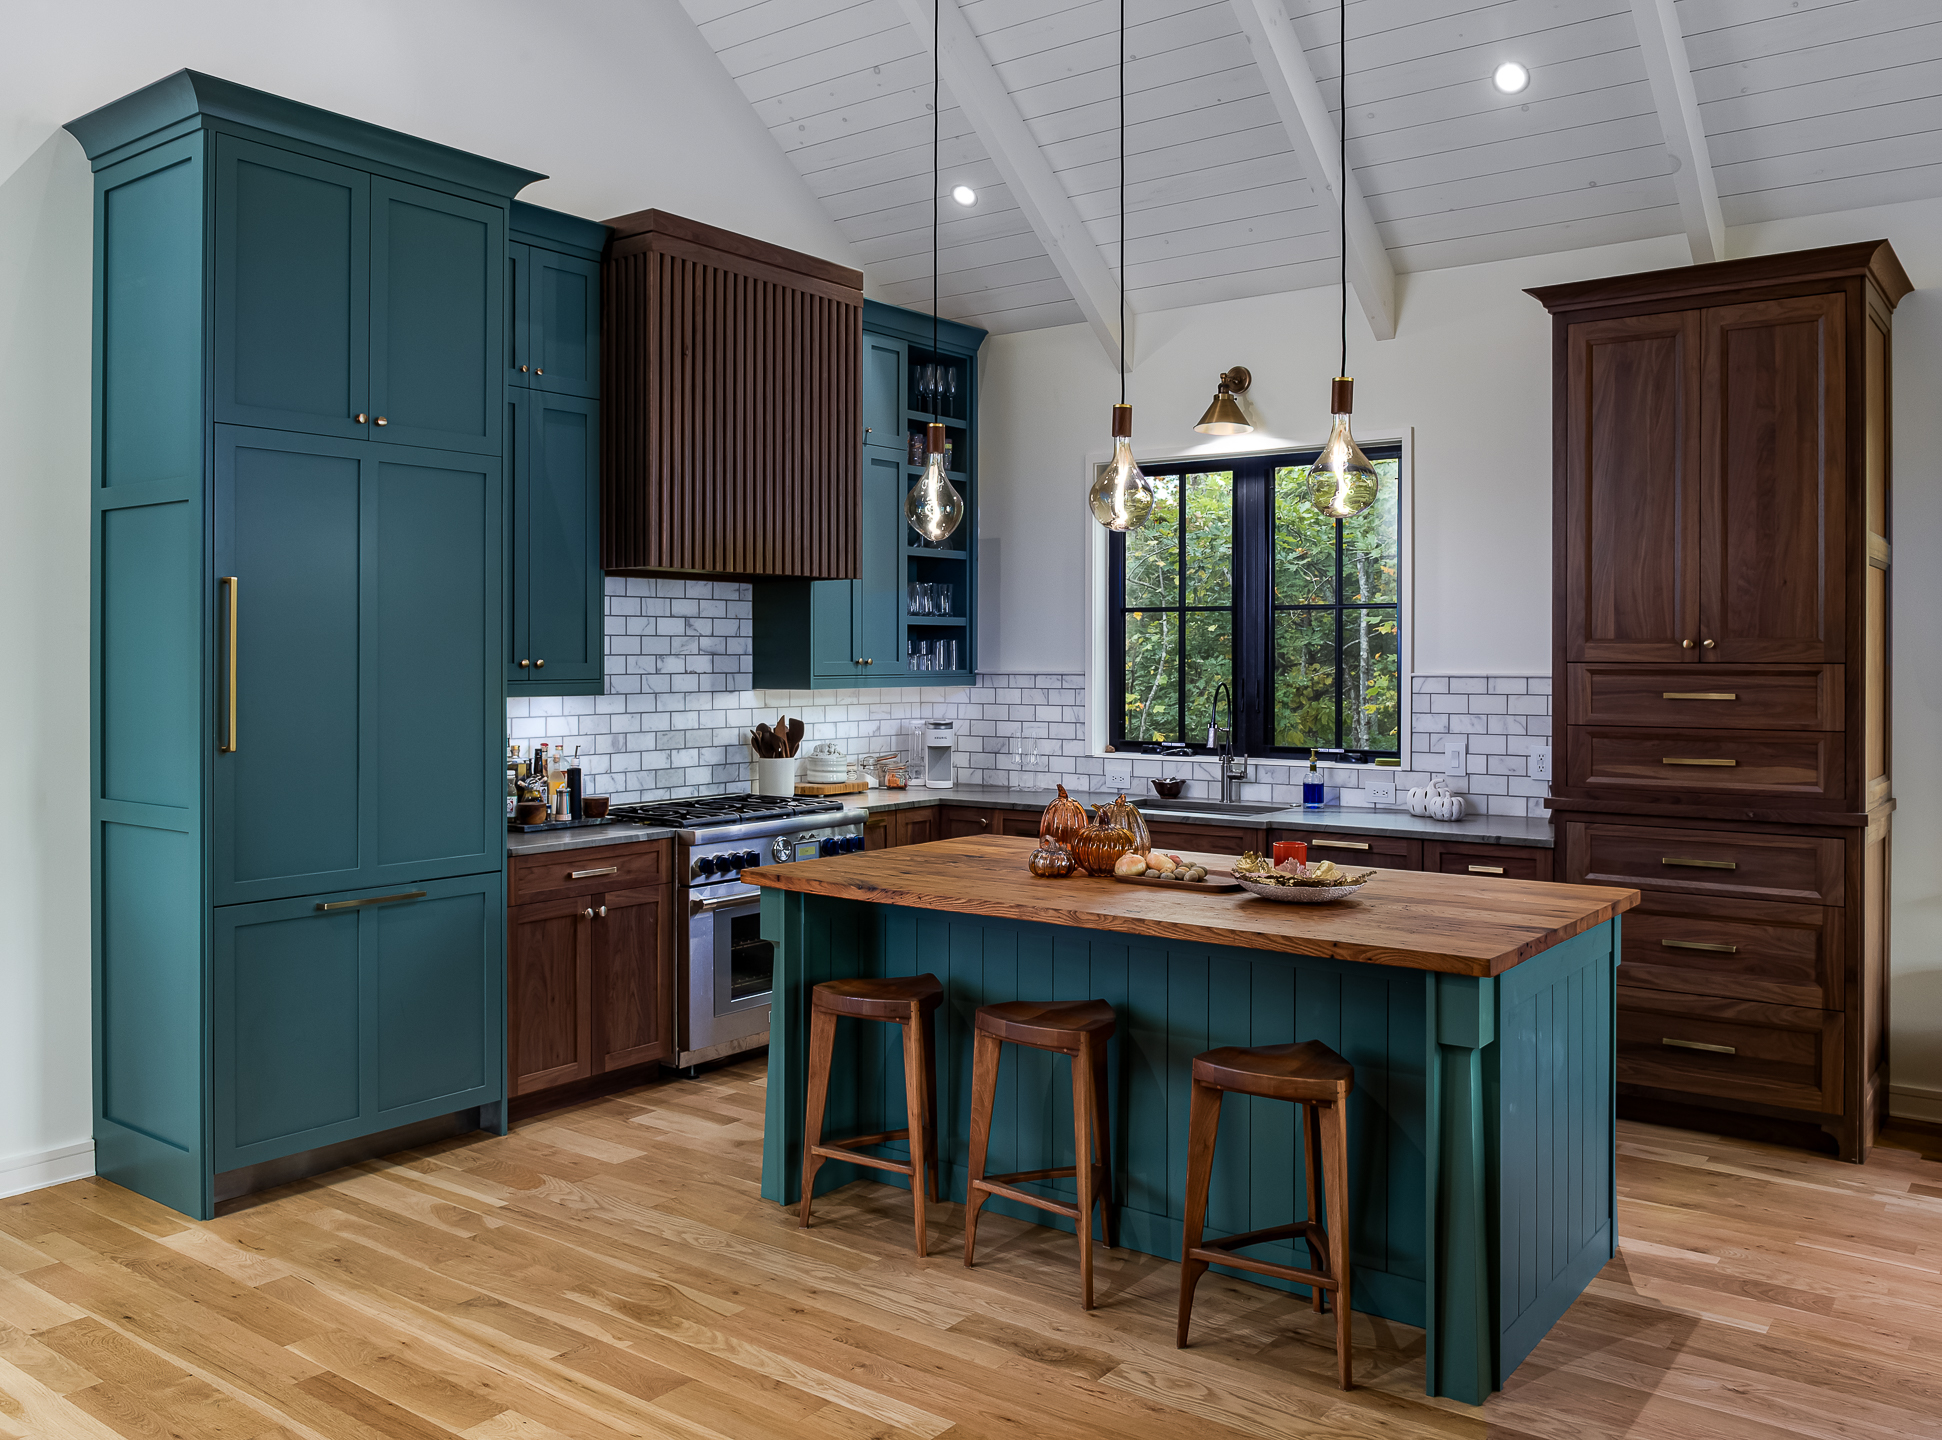 Interior design photography of a kitchen with teal cabinets and wooden floors taken by Atlanta interior photographer